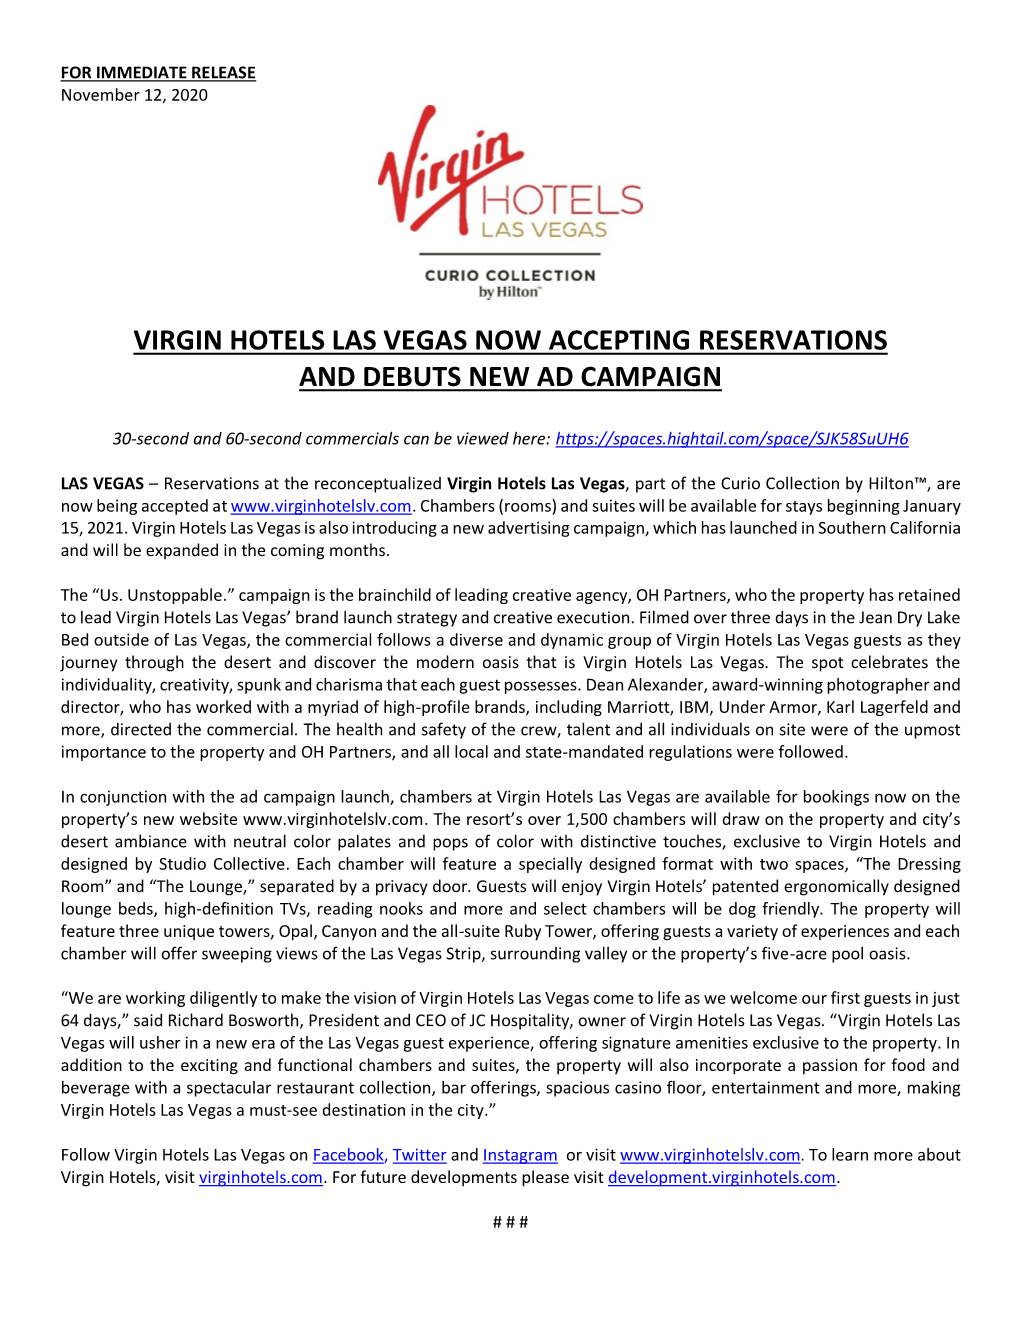 Virgin Hotels Las Vegas Now Accepting Reservations and Debuts New Ad Campaign